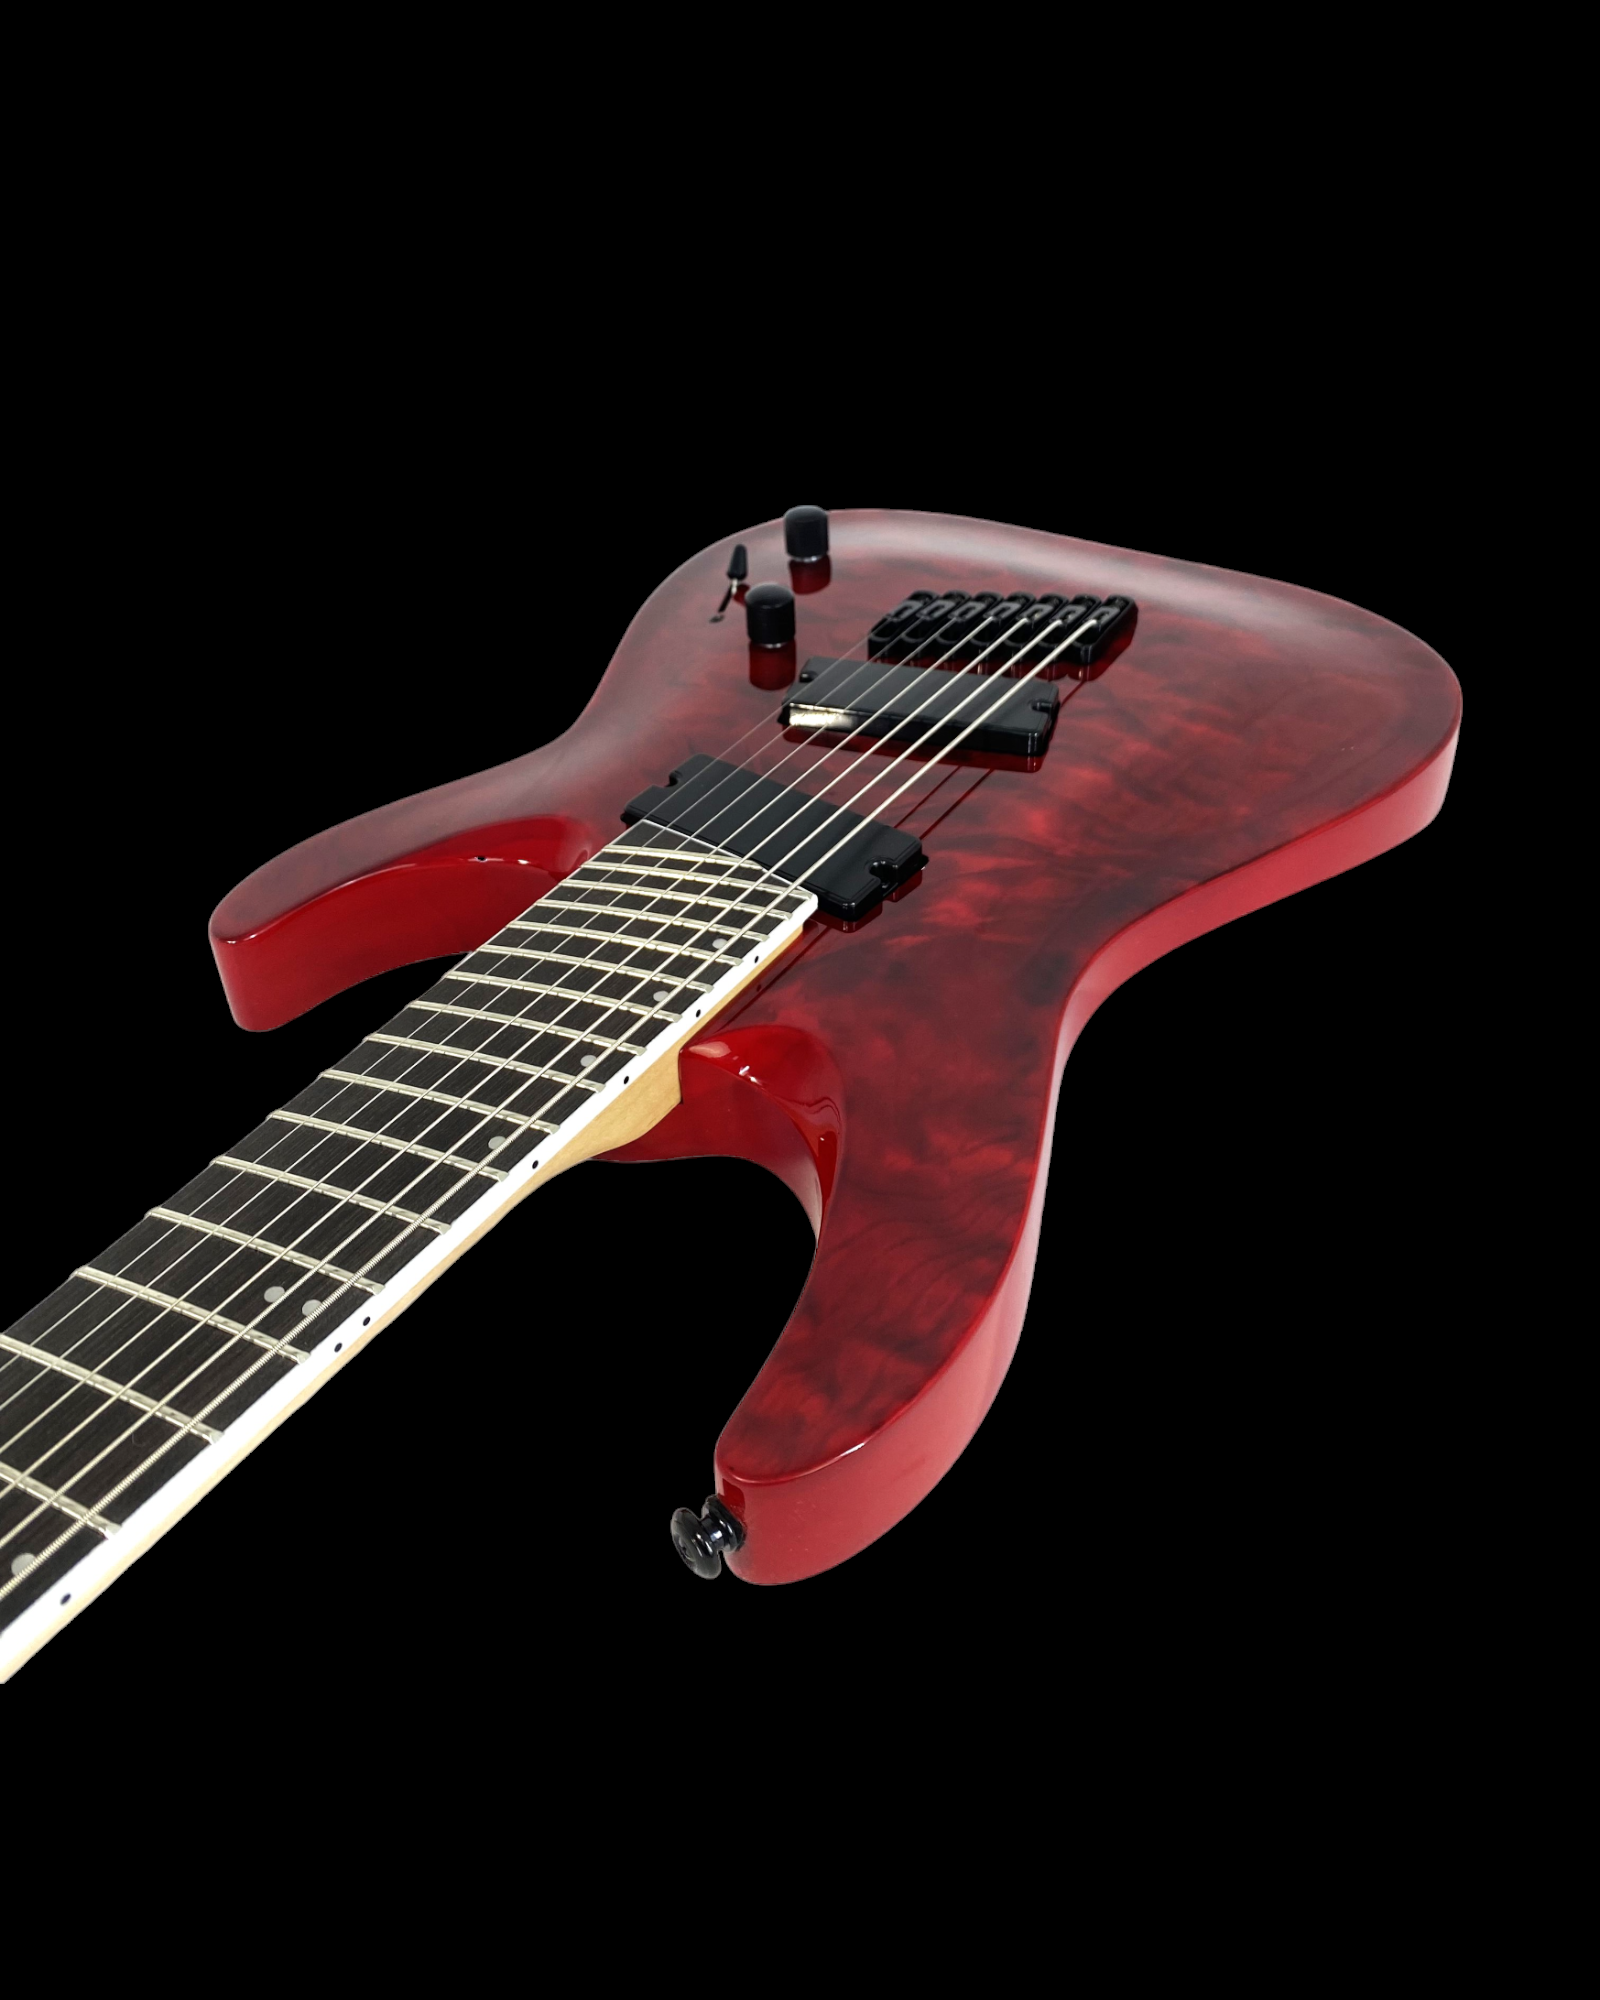 Haze 7-String Fanned Fret Built-in Preamp HAX Electric Guitar - Red 7QFFTRD